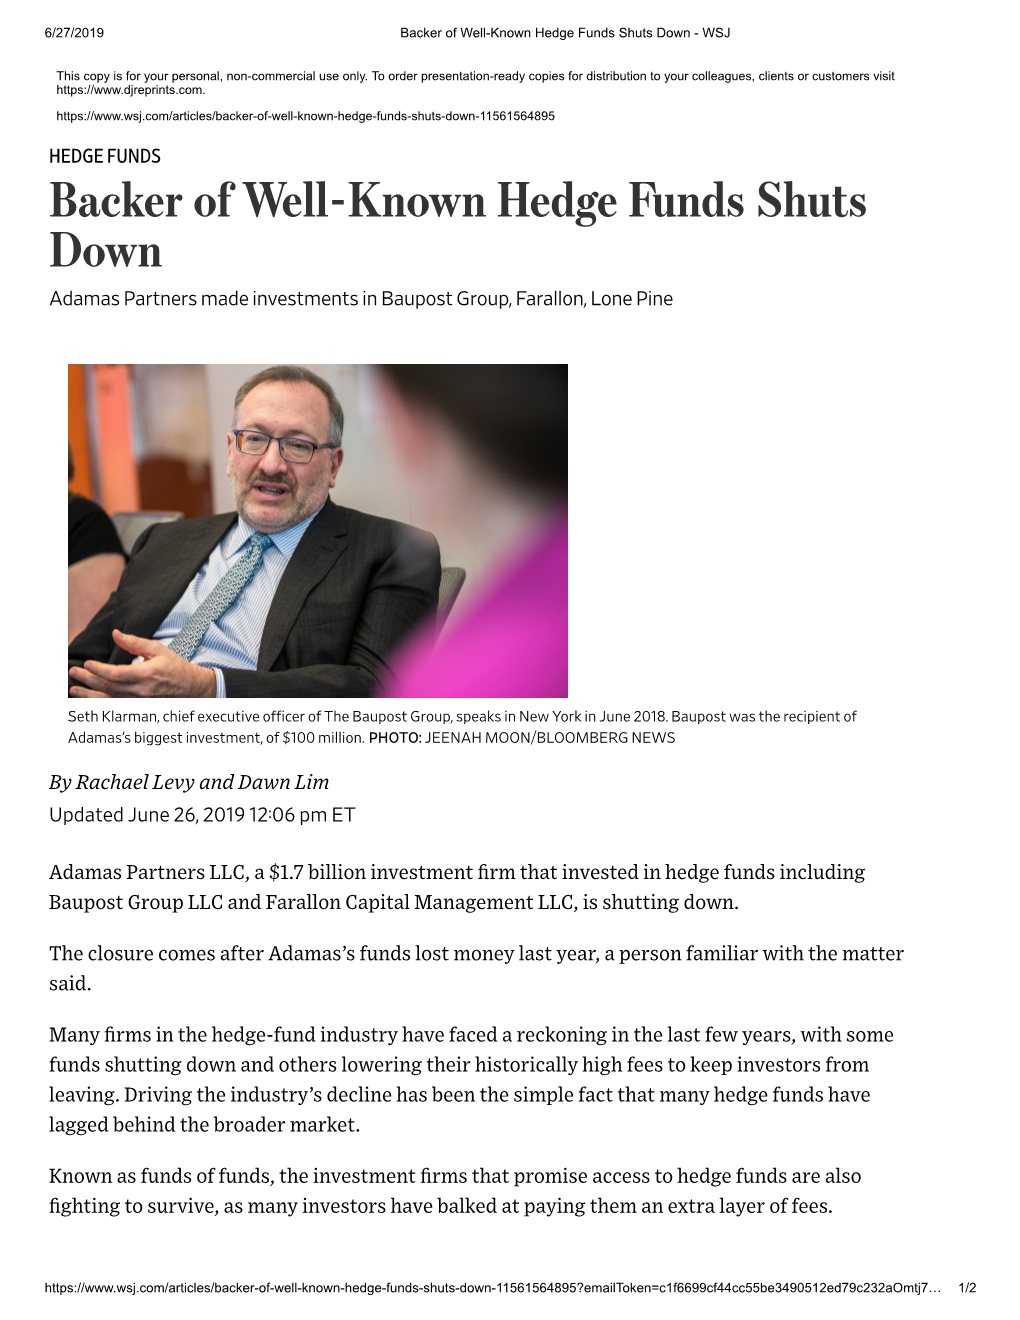 Backer of Well-Known Hedge Funds Shuts Down - WSJ